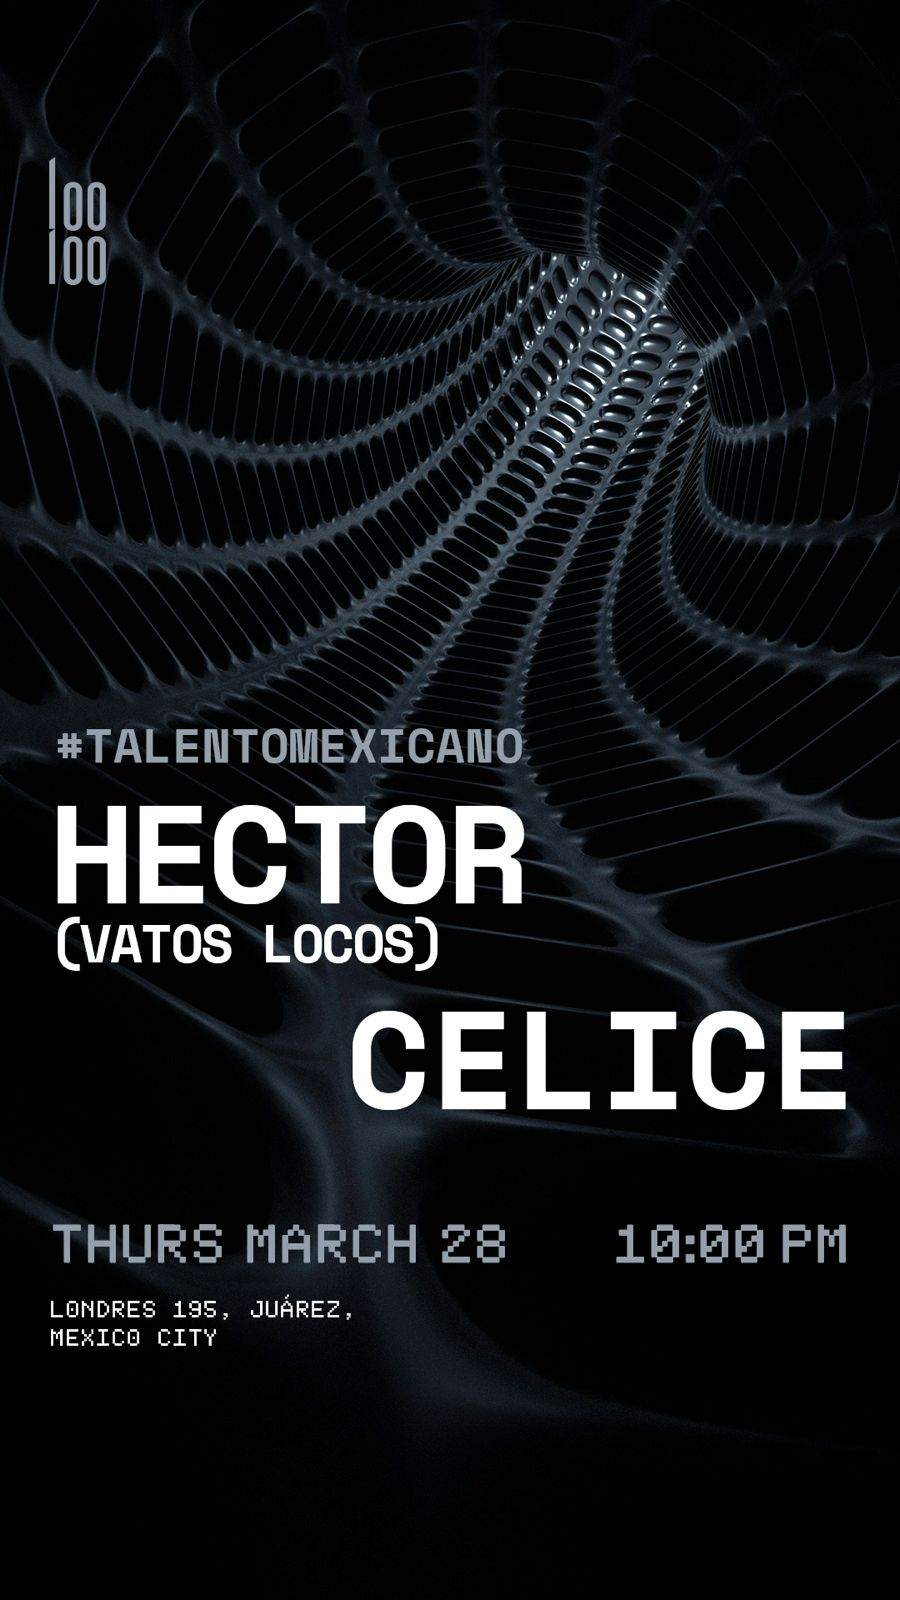 Hector/CELICE - フライヤー表